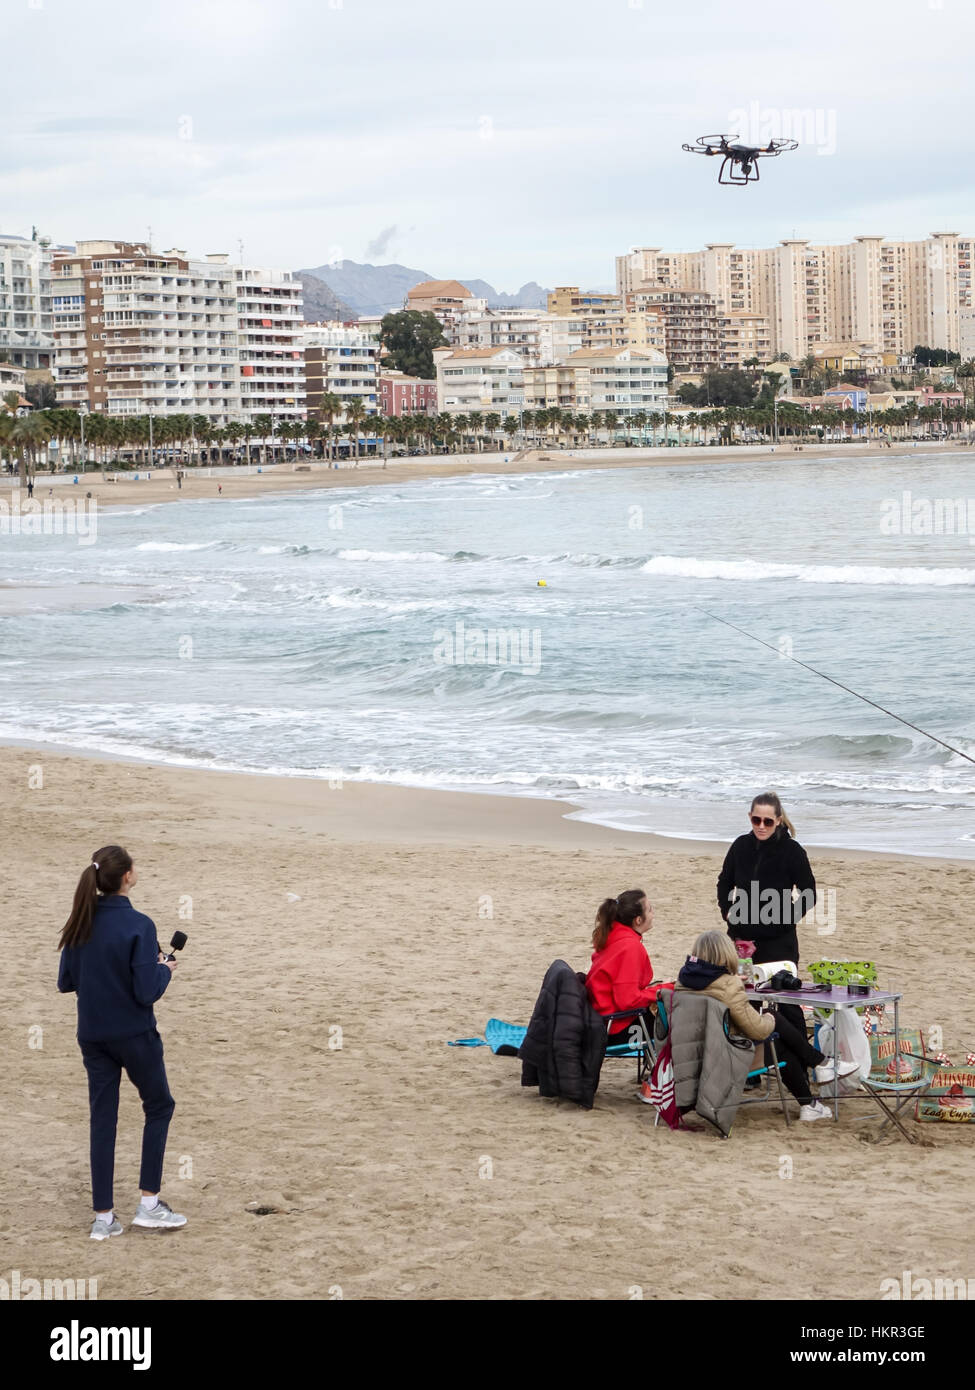 Family fishing on a beach in Villajoyosa, Alicante Province, Spain. Young girl flies quadcopter drone. Stock Photo